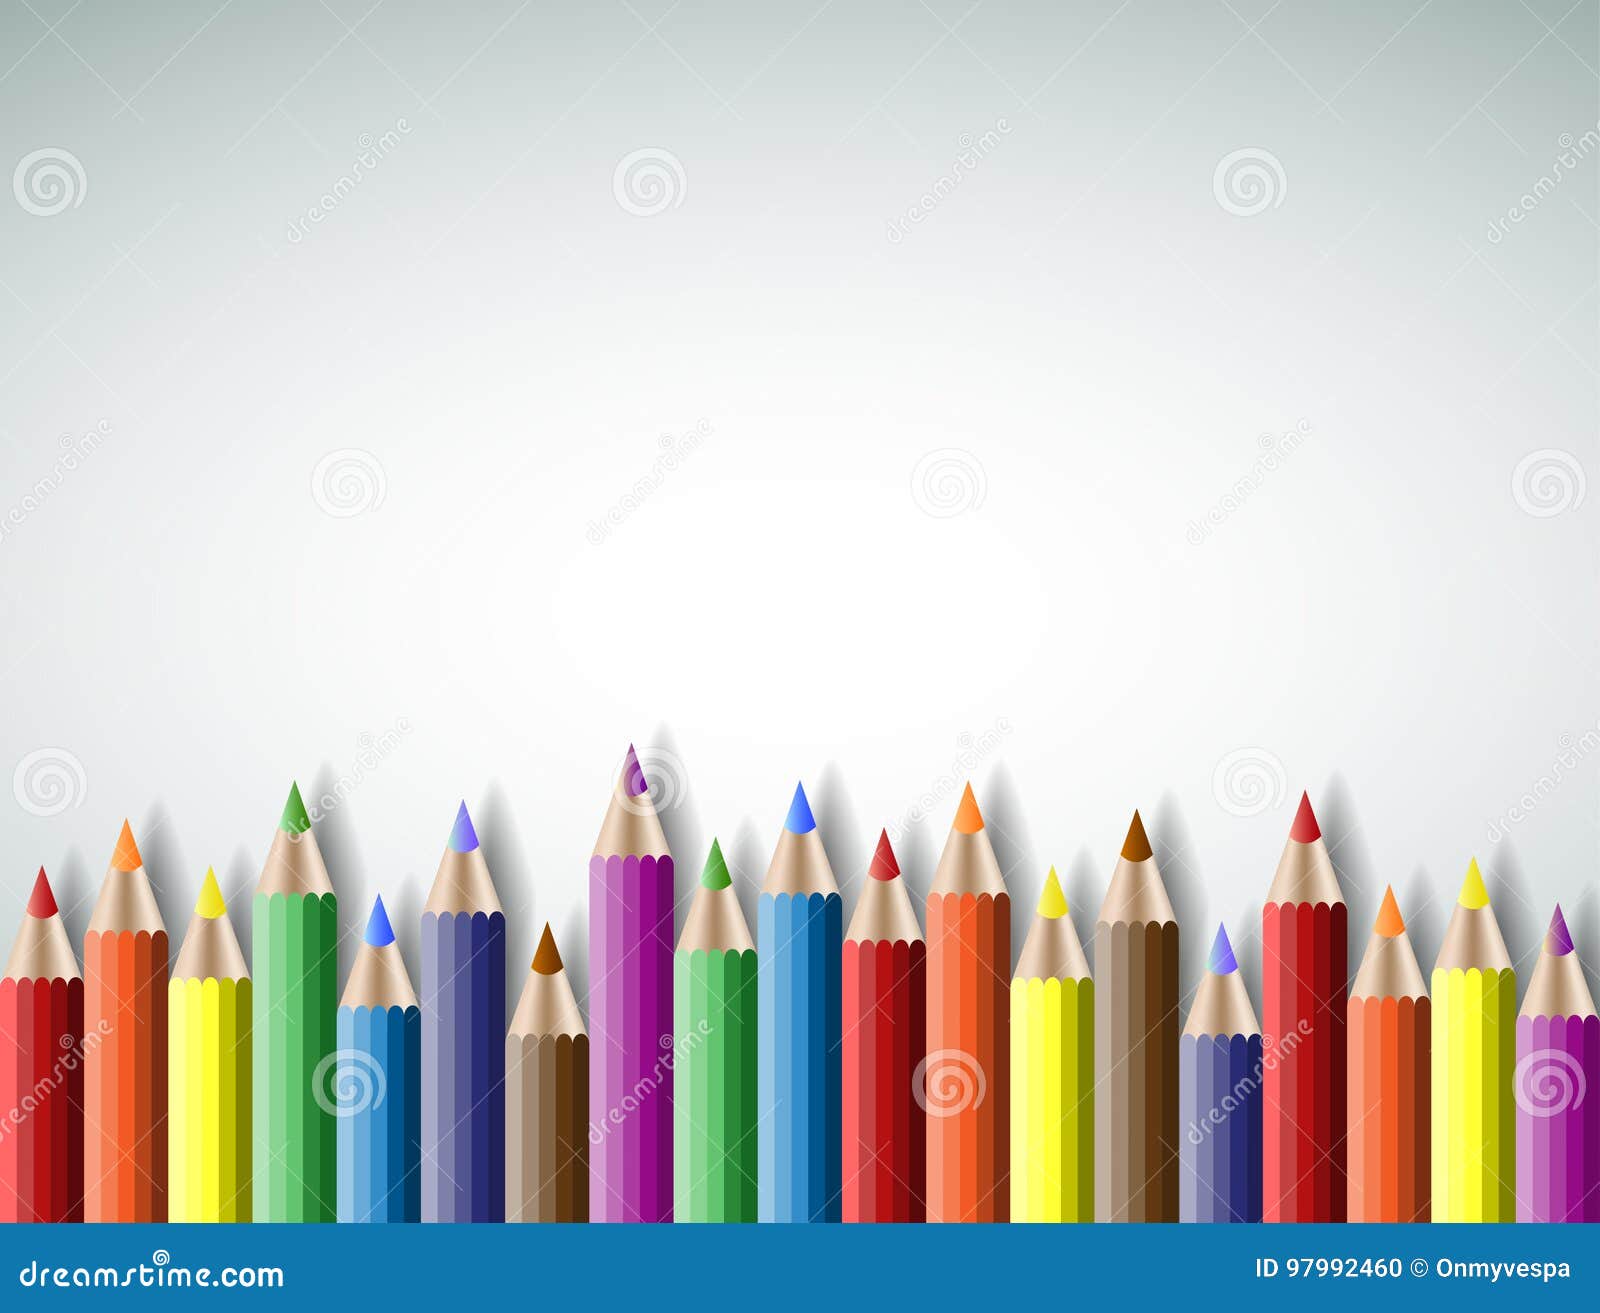 colorful pencil with copy space on whtie background